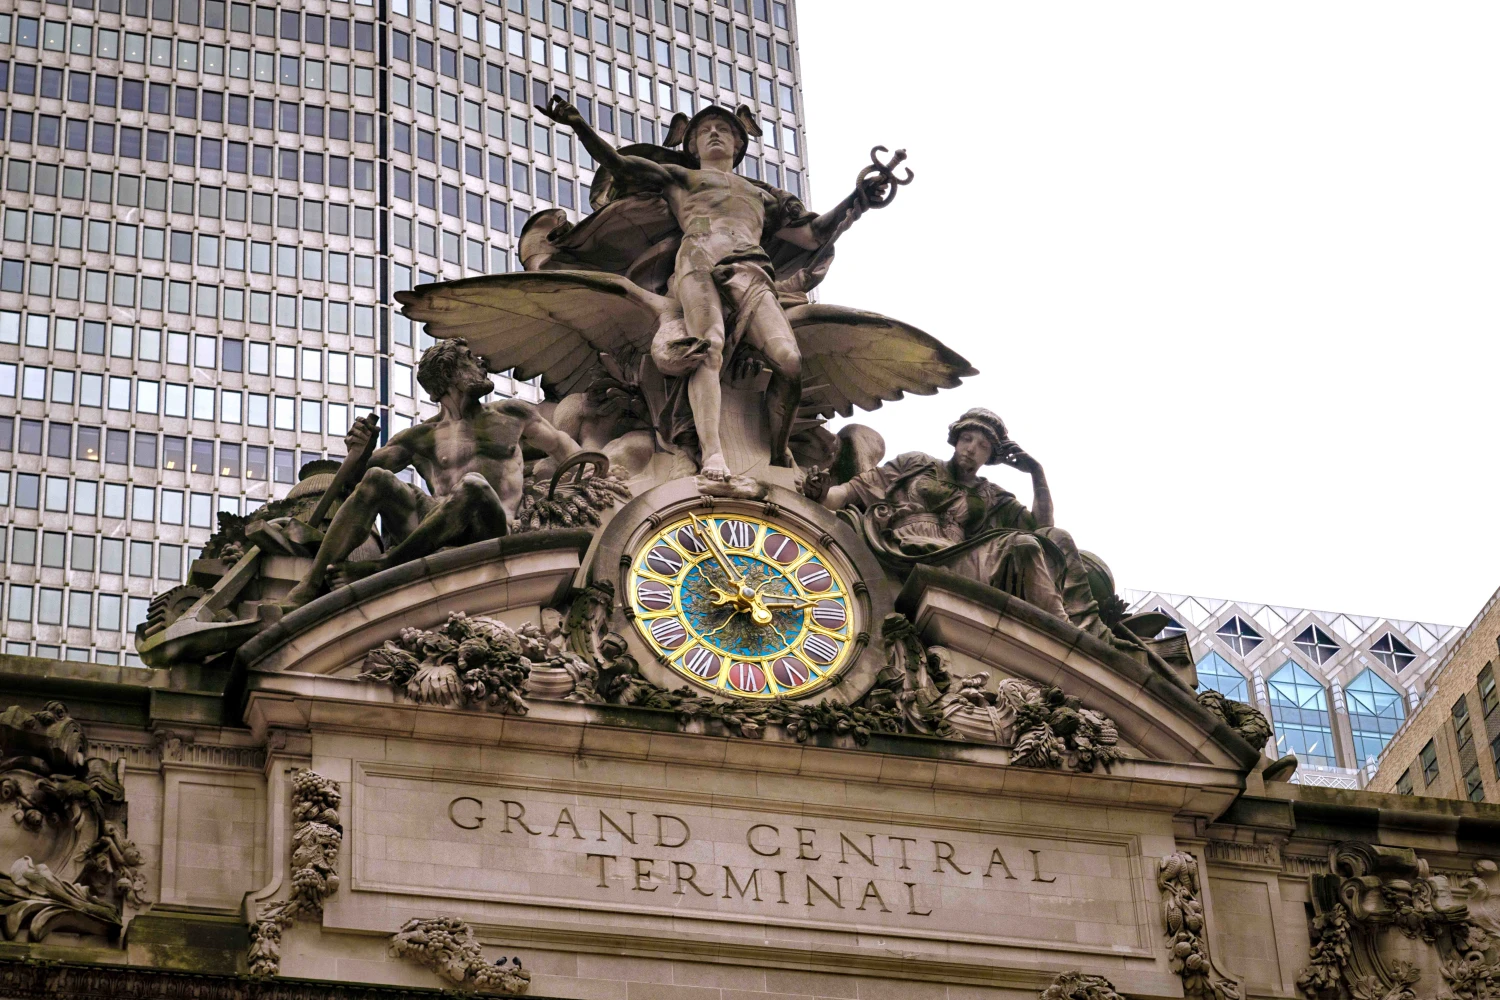 Secrets of Grand Central Tour: What to expect - 2